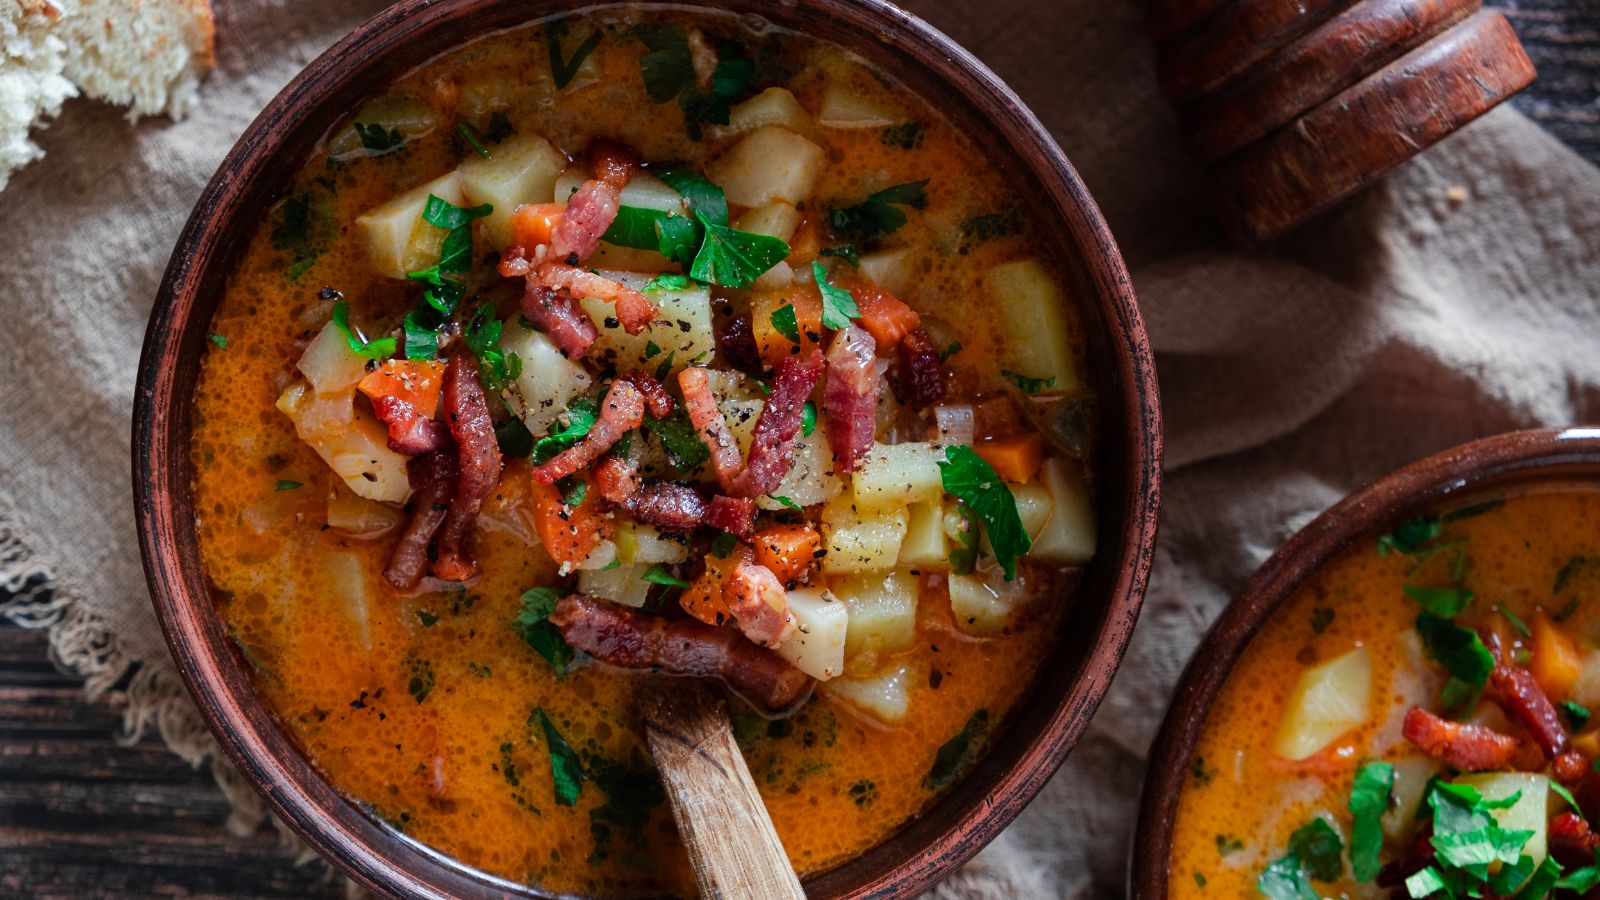 A bowl full of chunky, creamy German potato soup with lots of veggies and bacon.